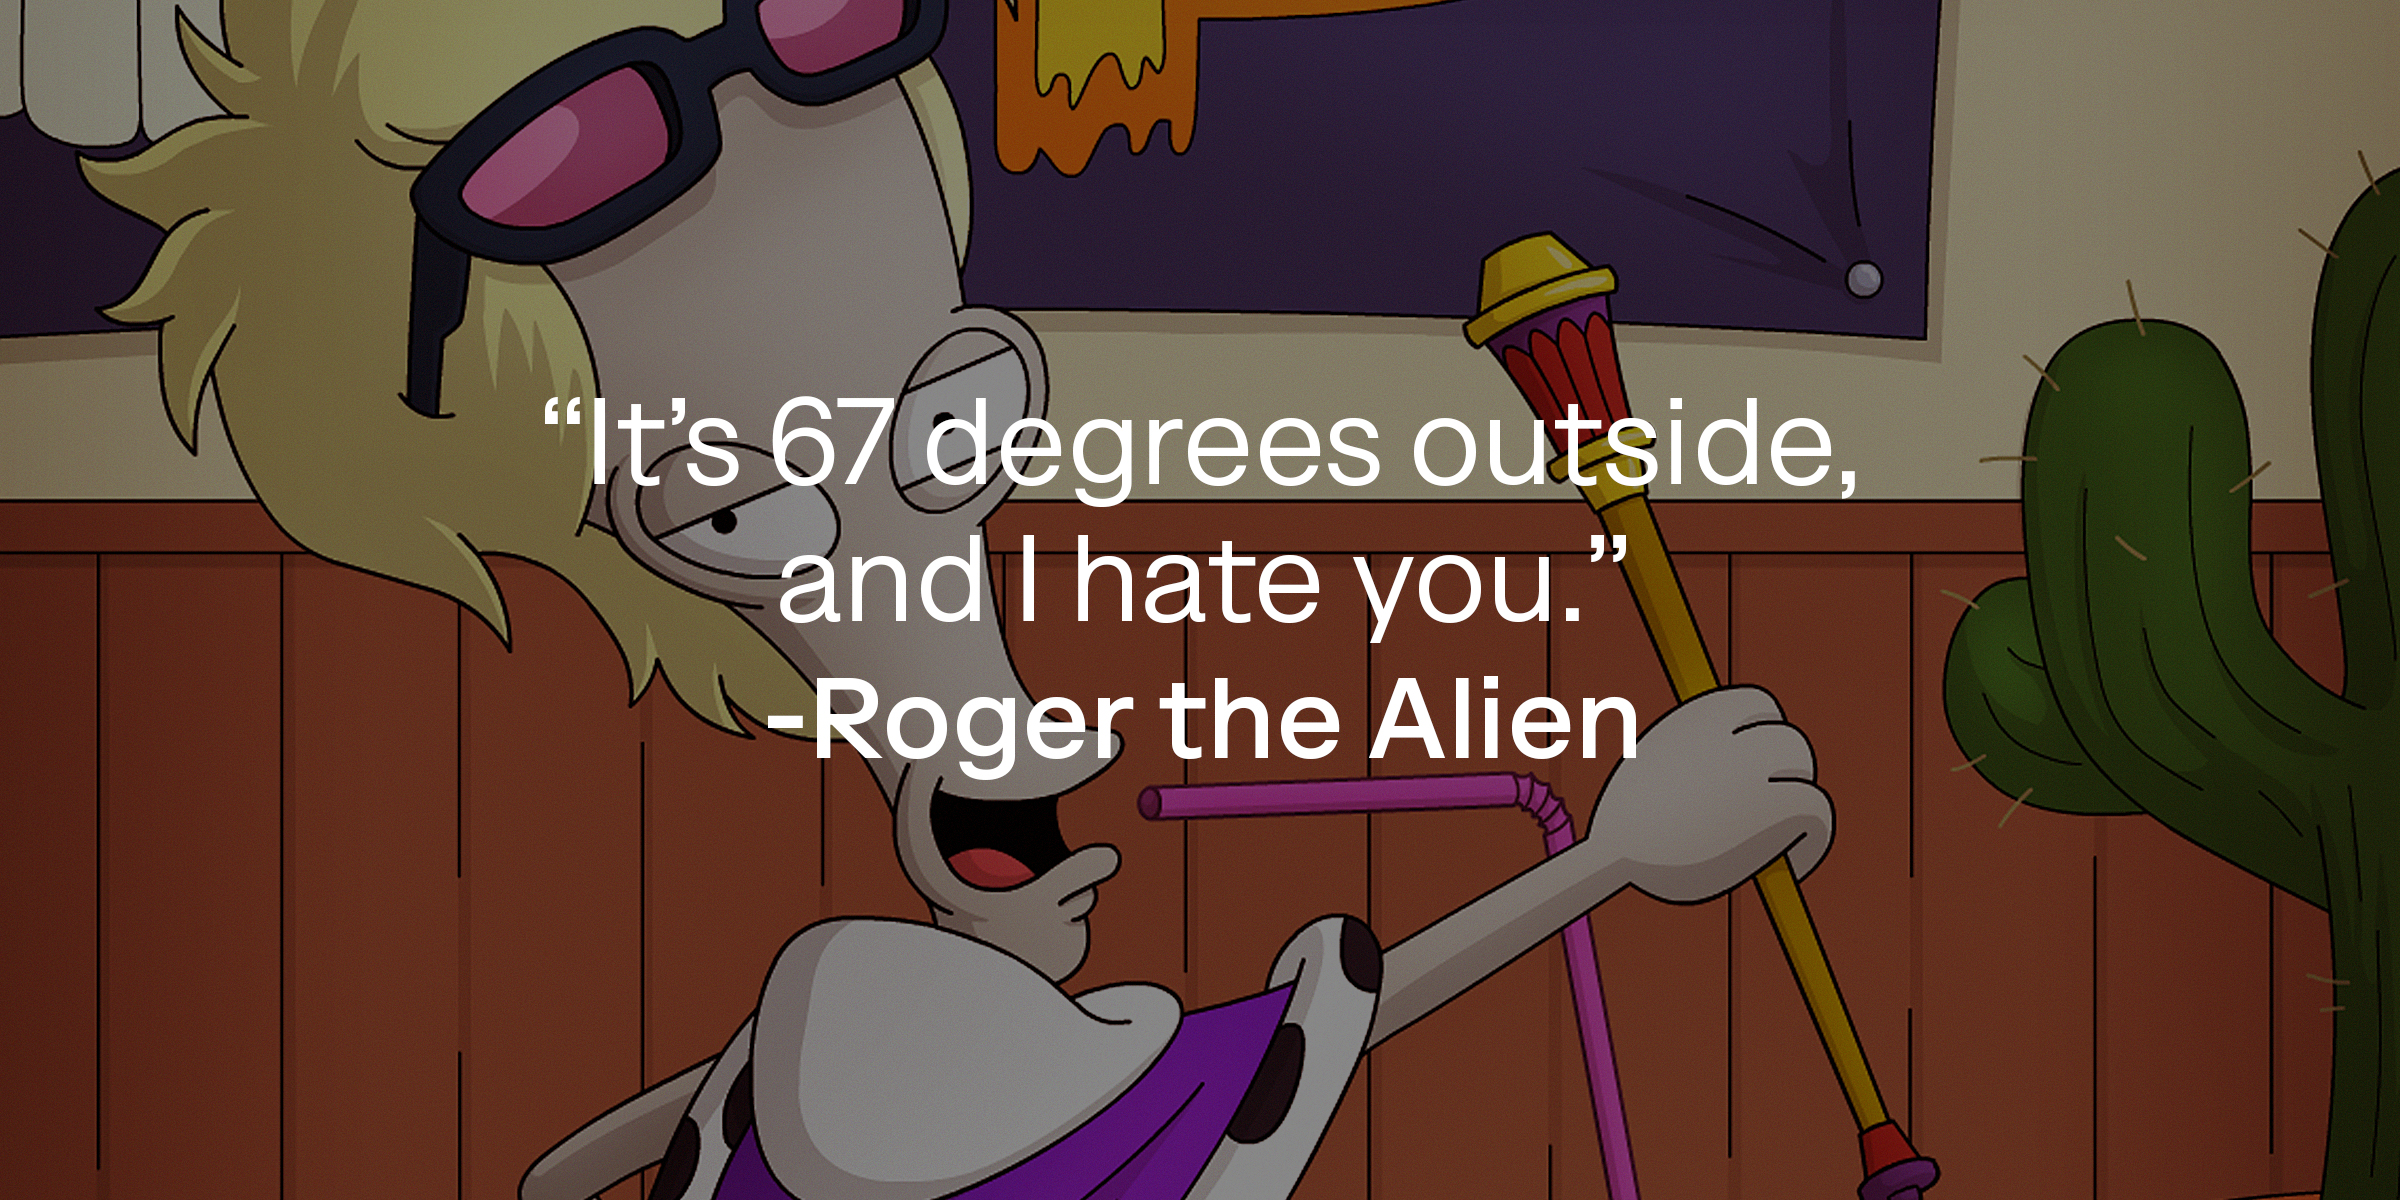 Roger the Alien with his quote, “It’s 67 degrees outside, and I hate you.” | Source: facebook.com/AmericanDad